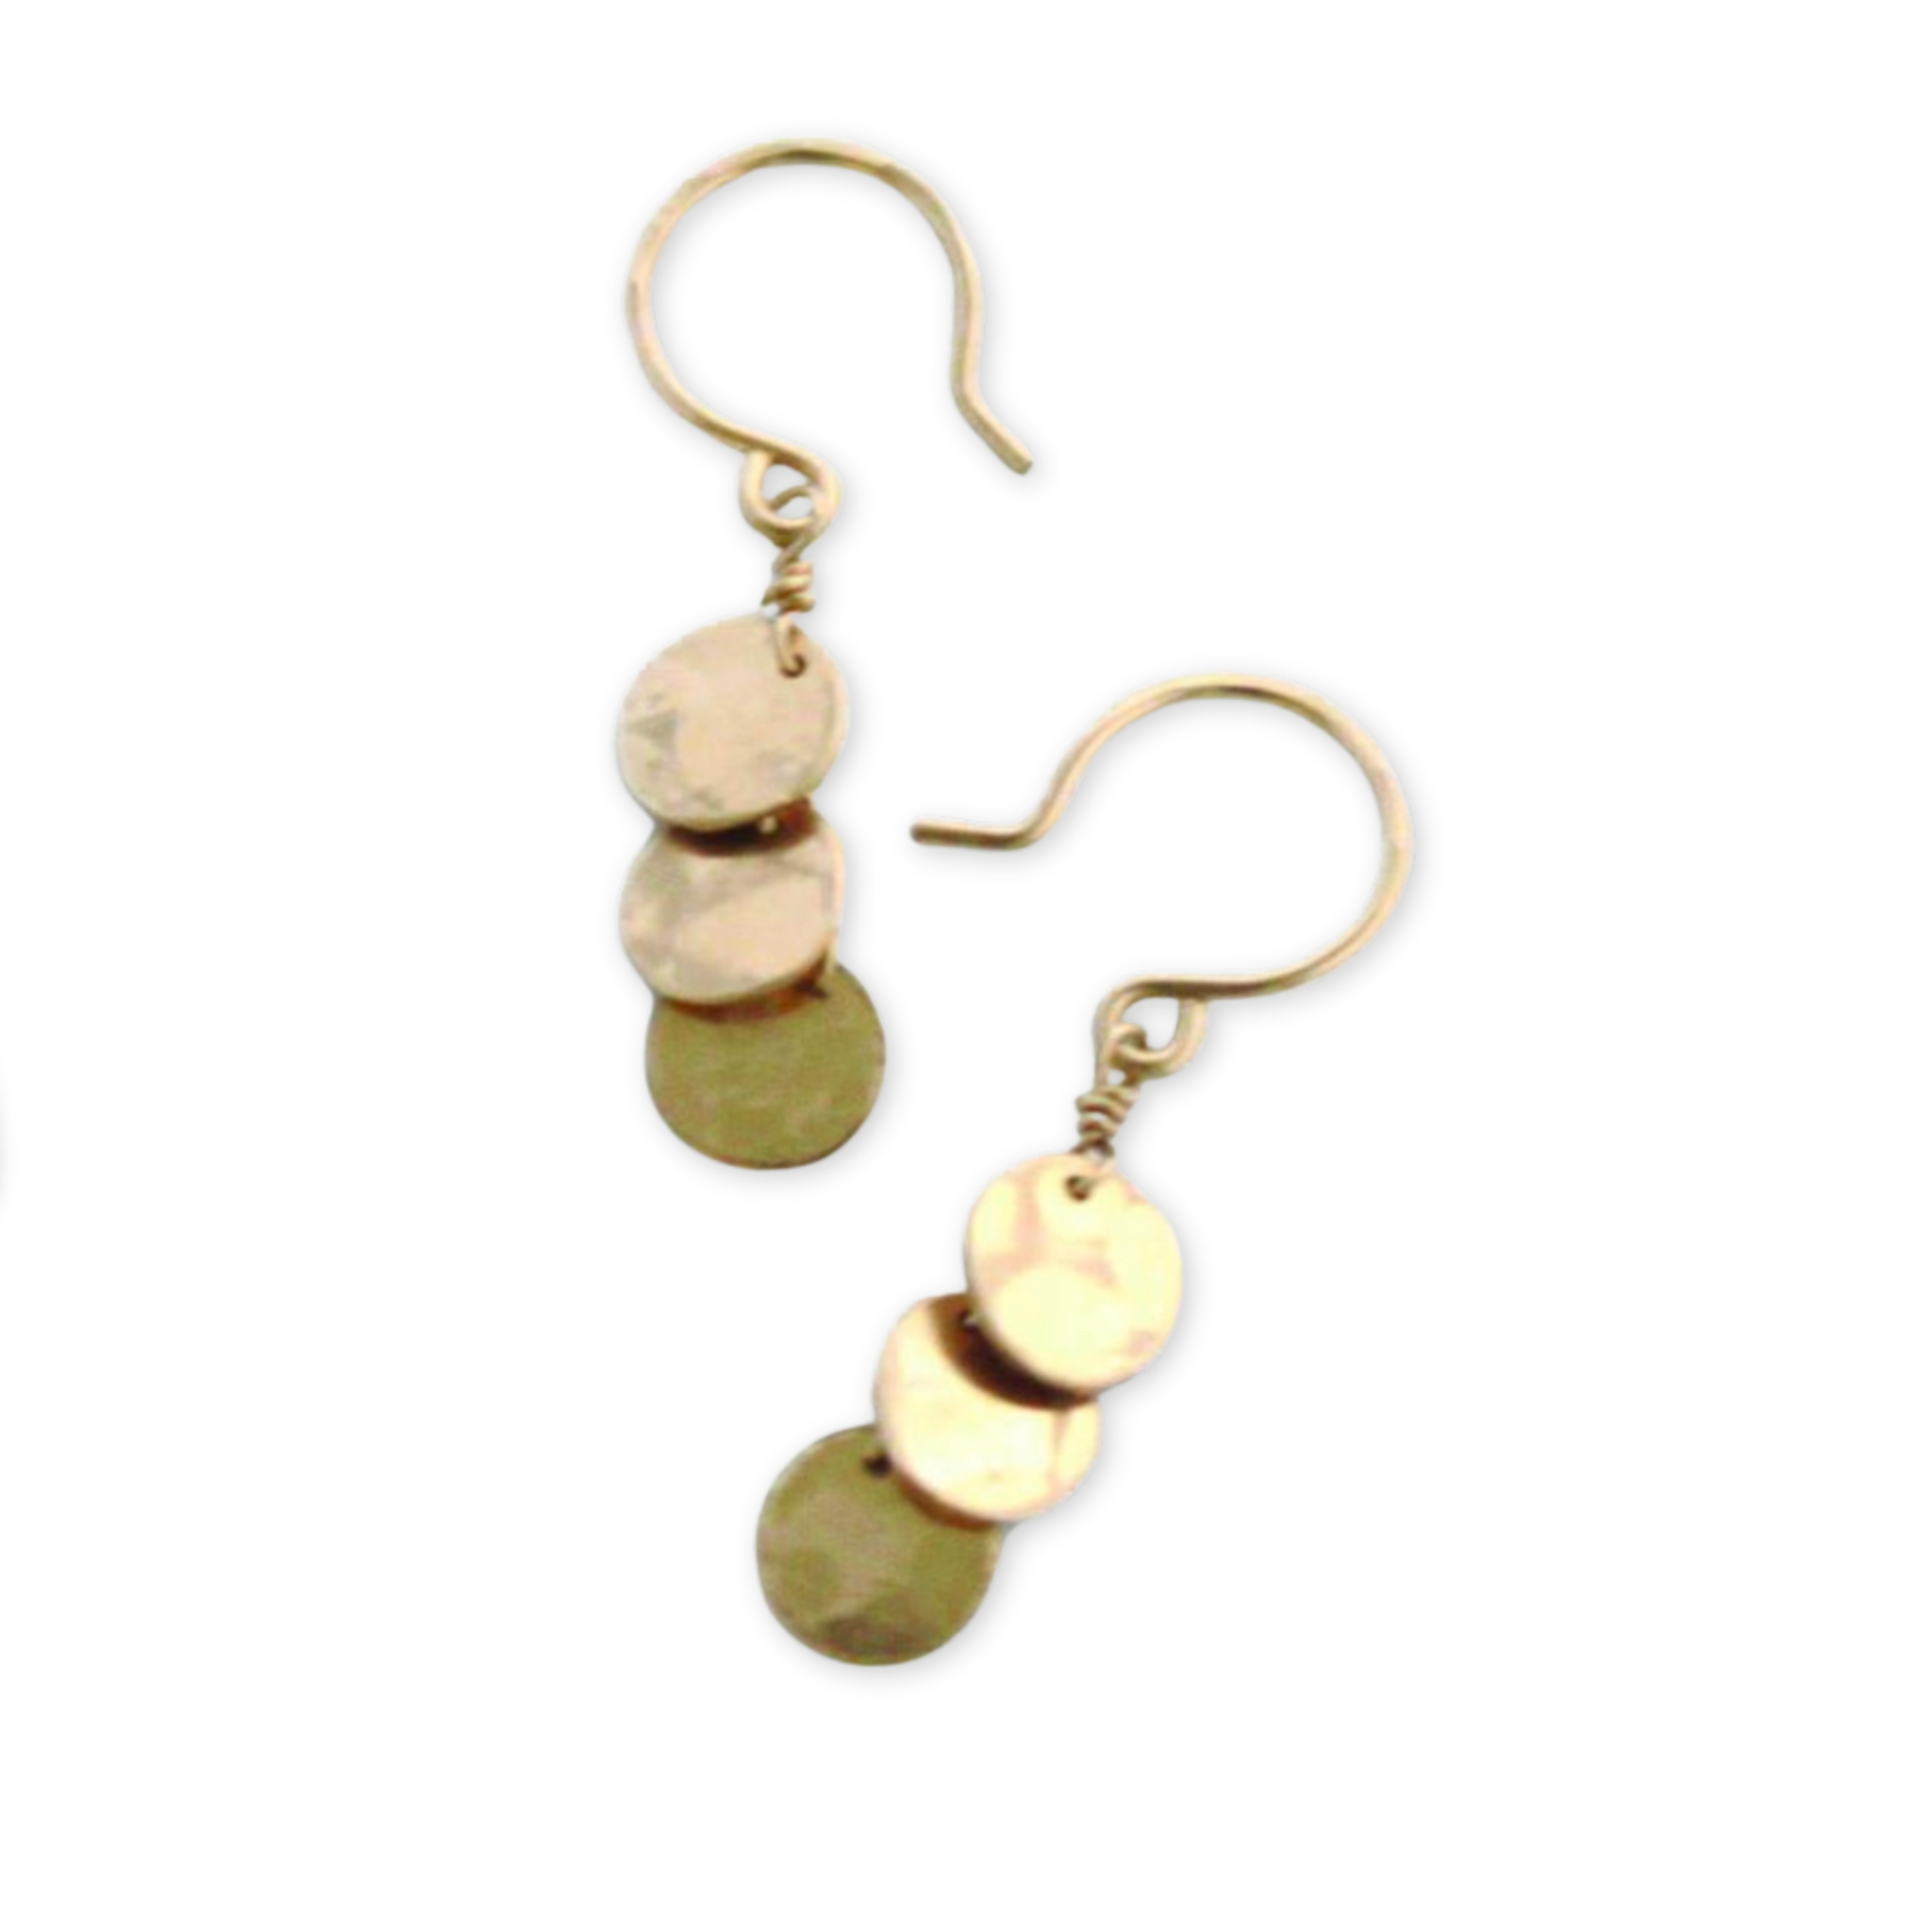 dangling earrings with three small hammered round discs